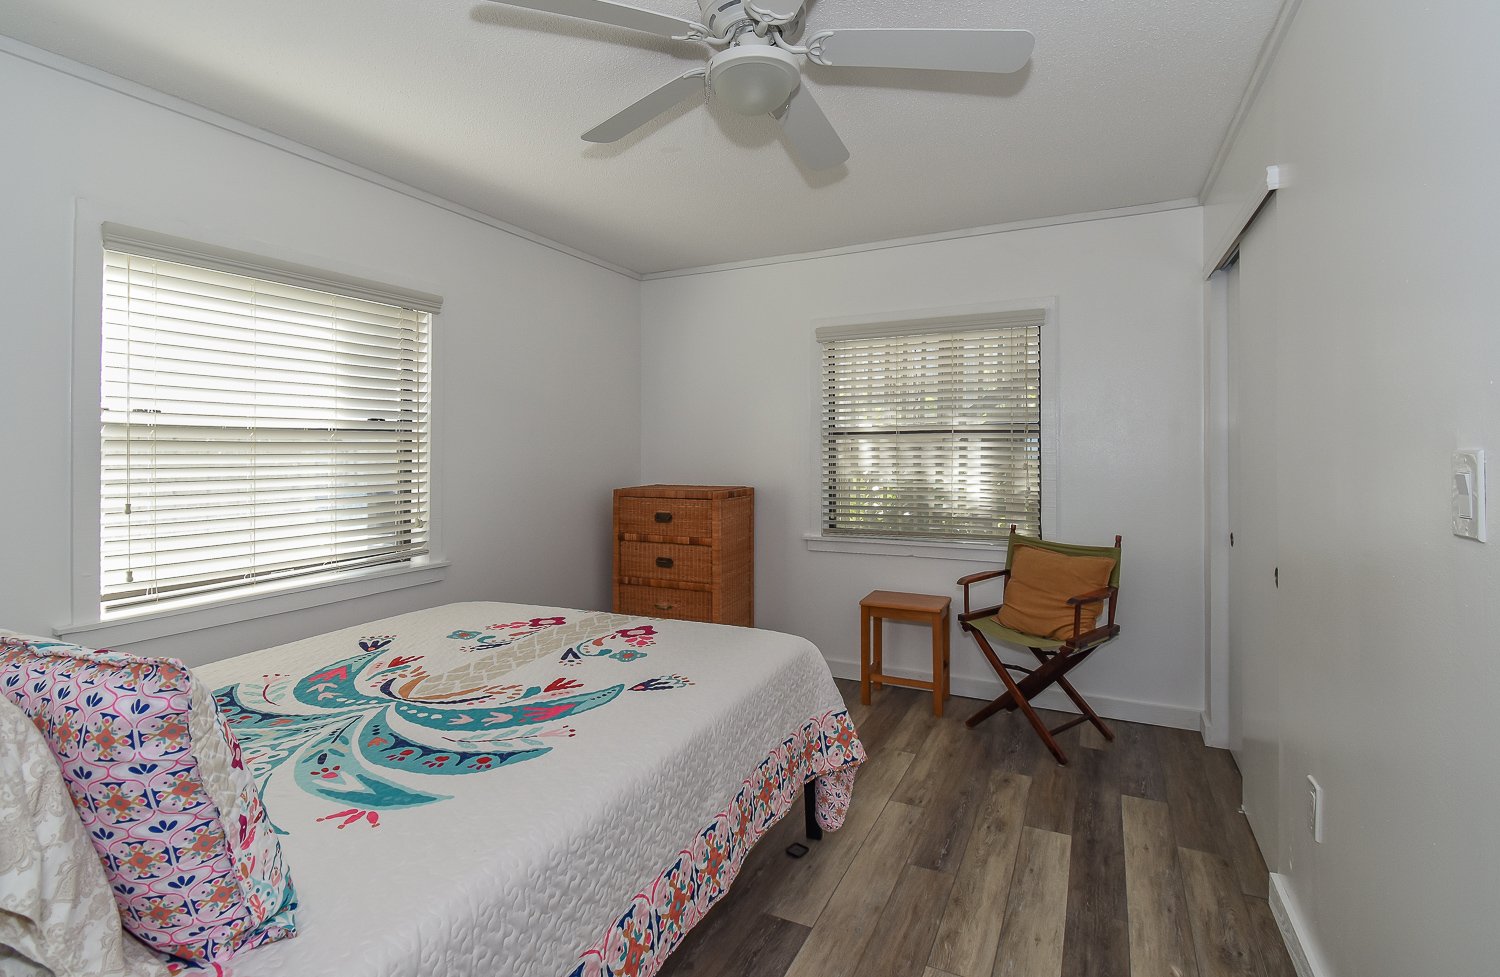 Bedroom with large bed, dresser, and ceiling fan